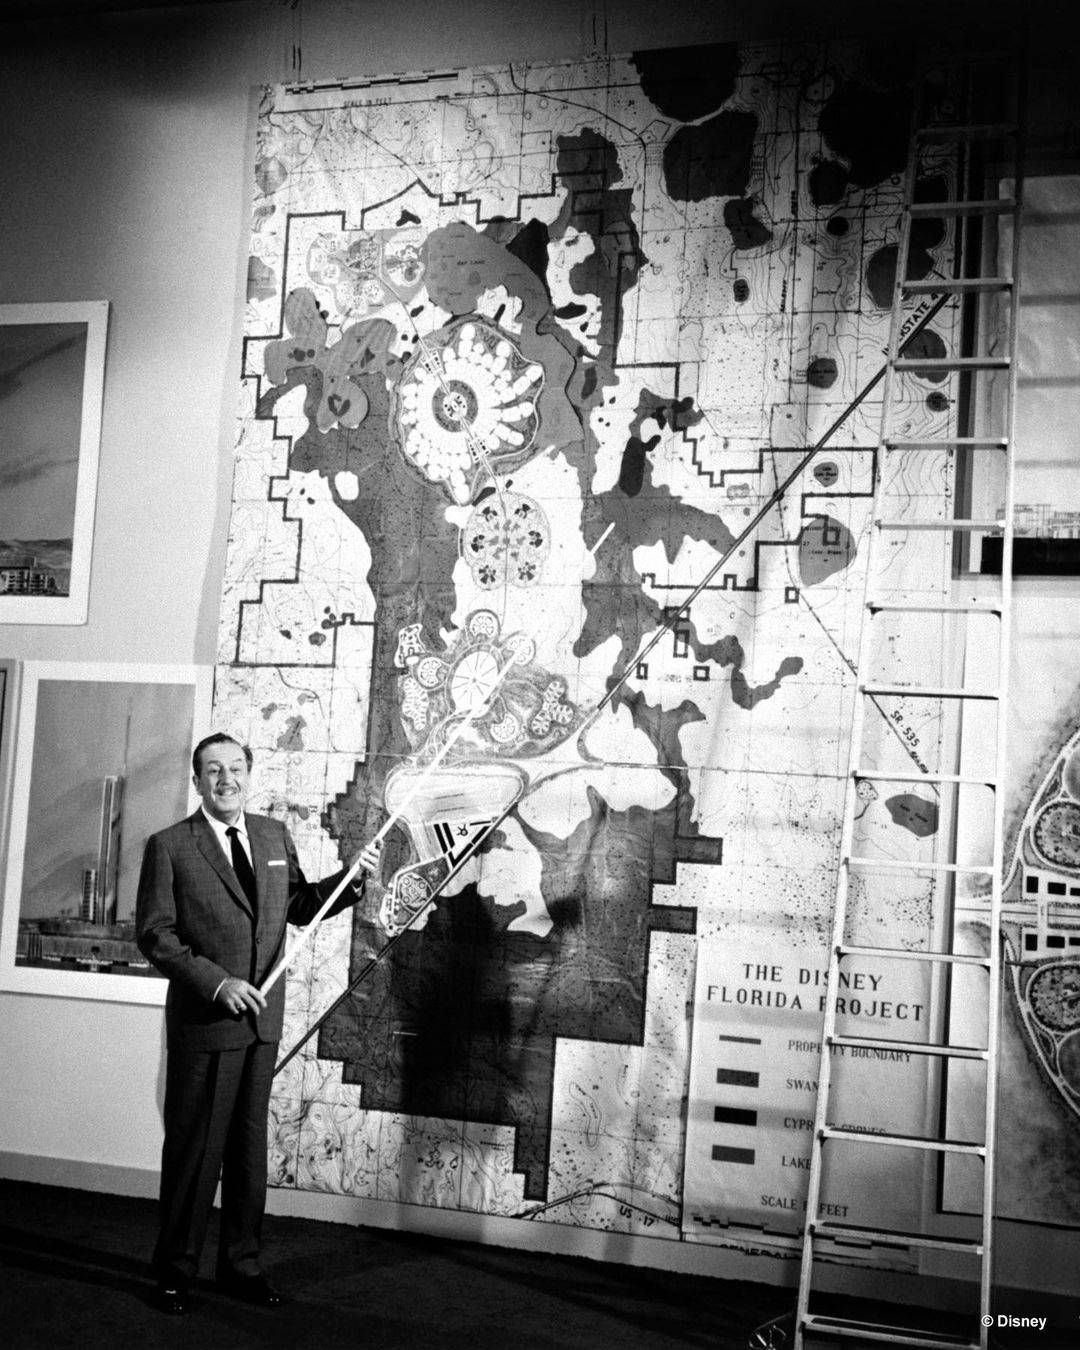 Walt Disney describing his grand vision for the Florida project in 1967